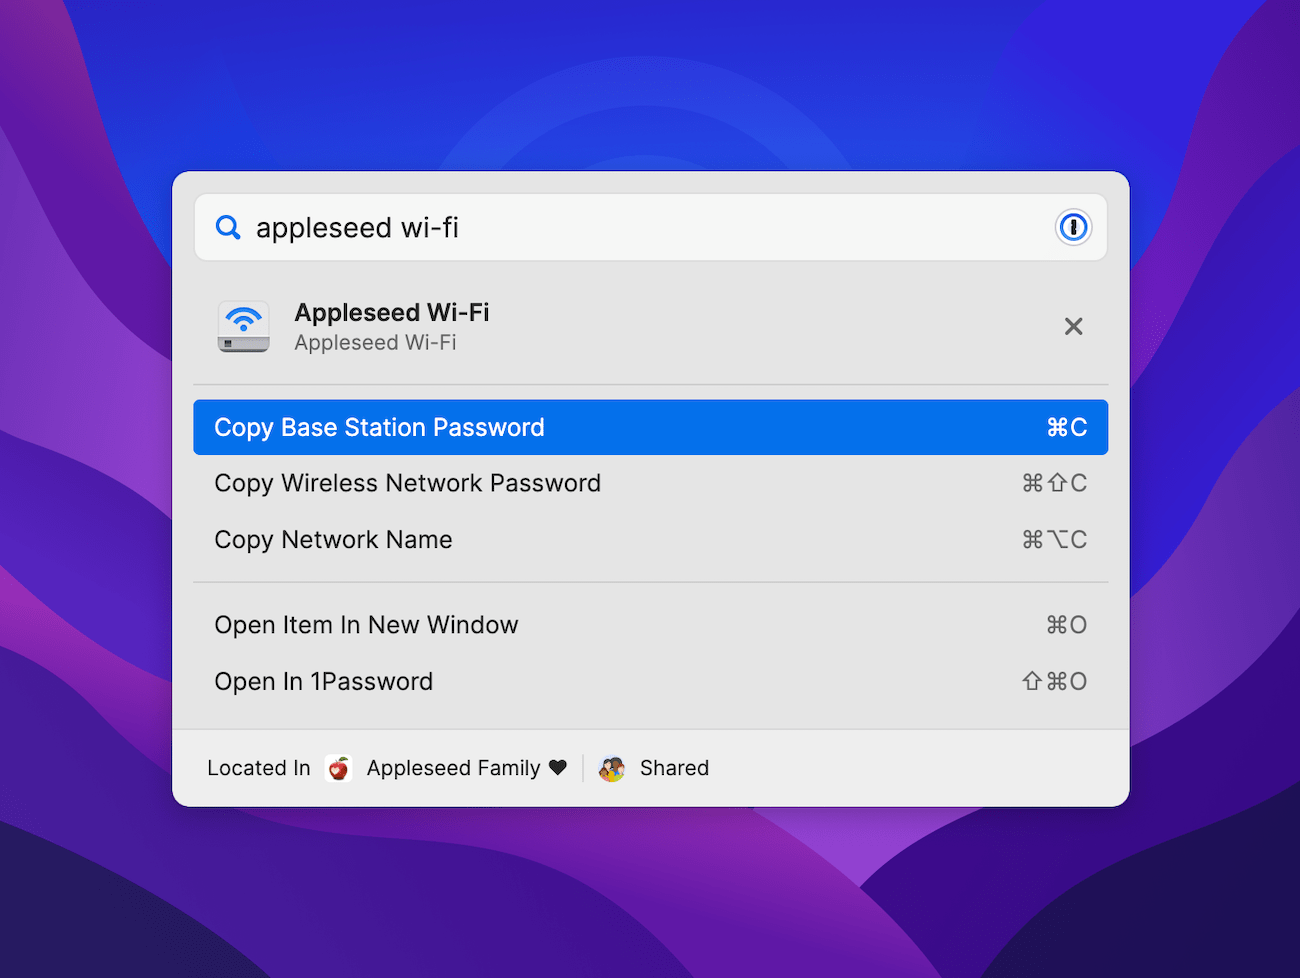 1Password for Mac Quick Access window displaying Wi-Fi item details view. Visible options include copying the base station password, copying the wireless network password, copying the network name, opening the item in a new window, and opening the item in 1Password.